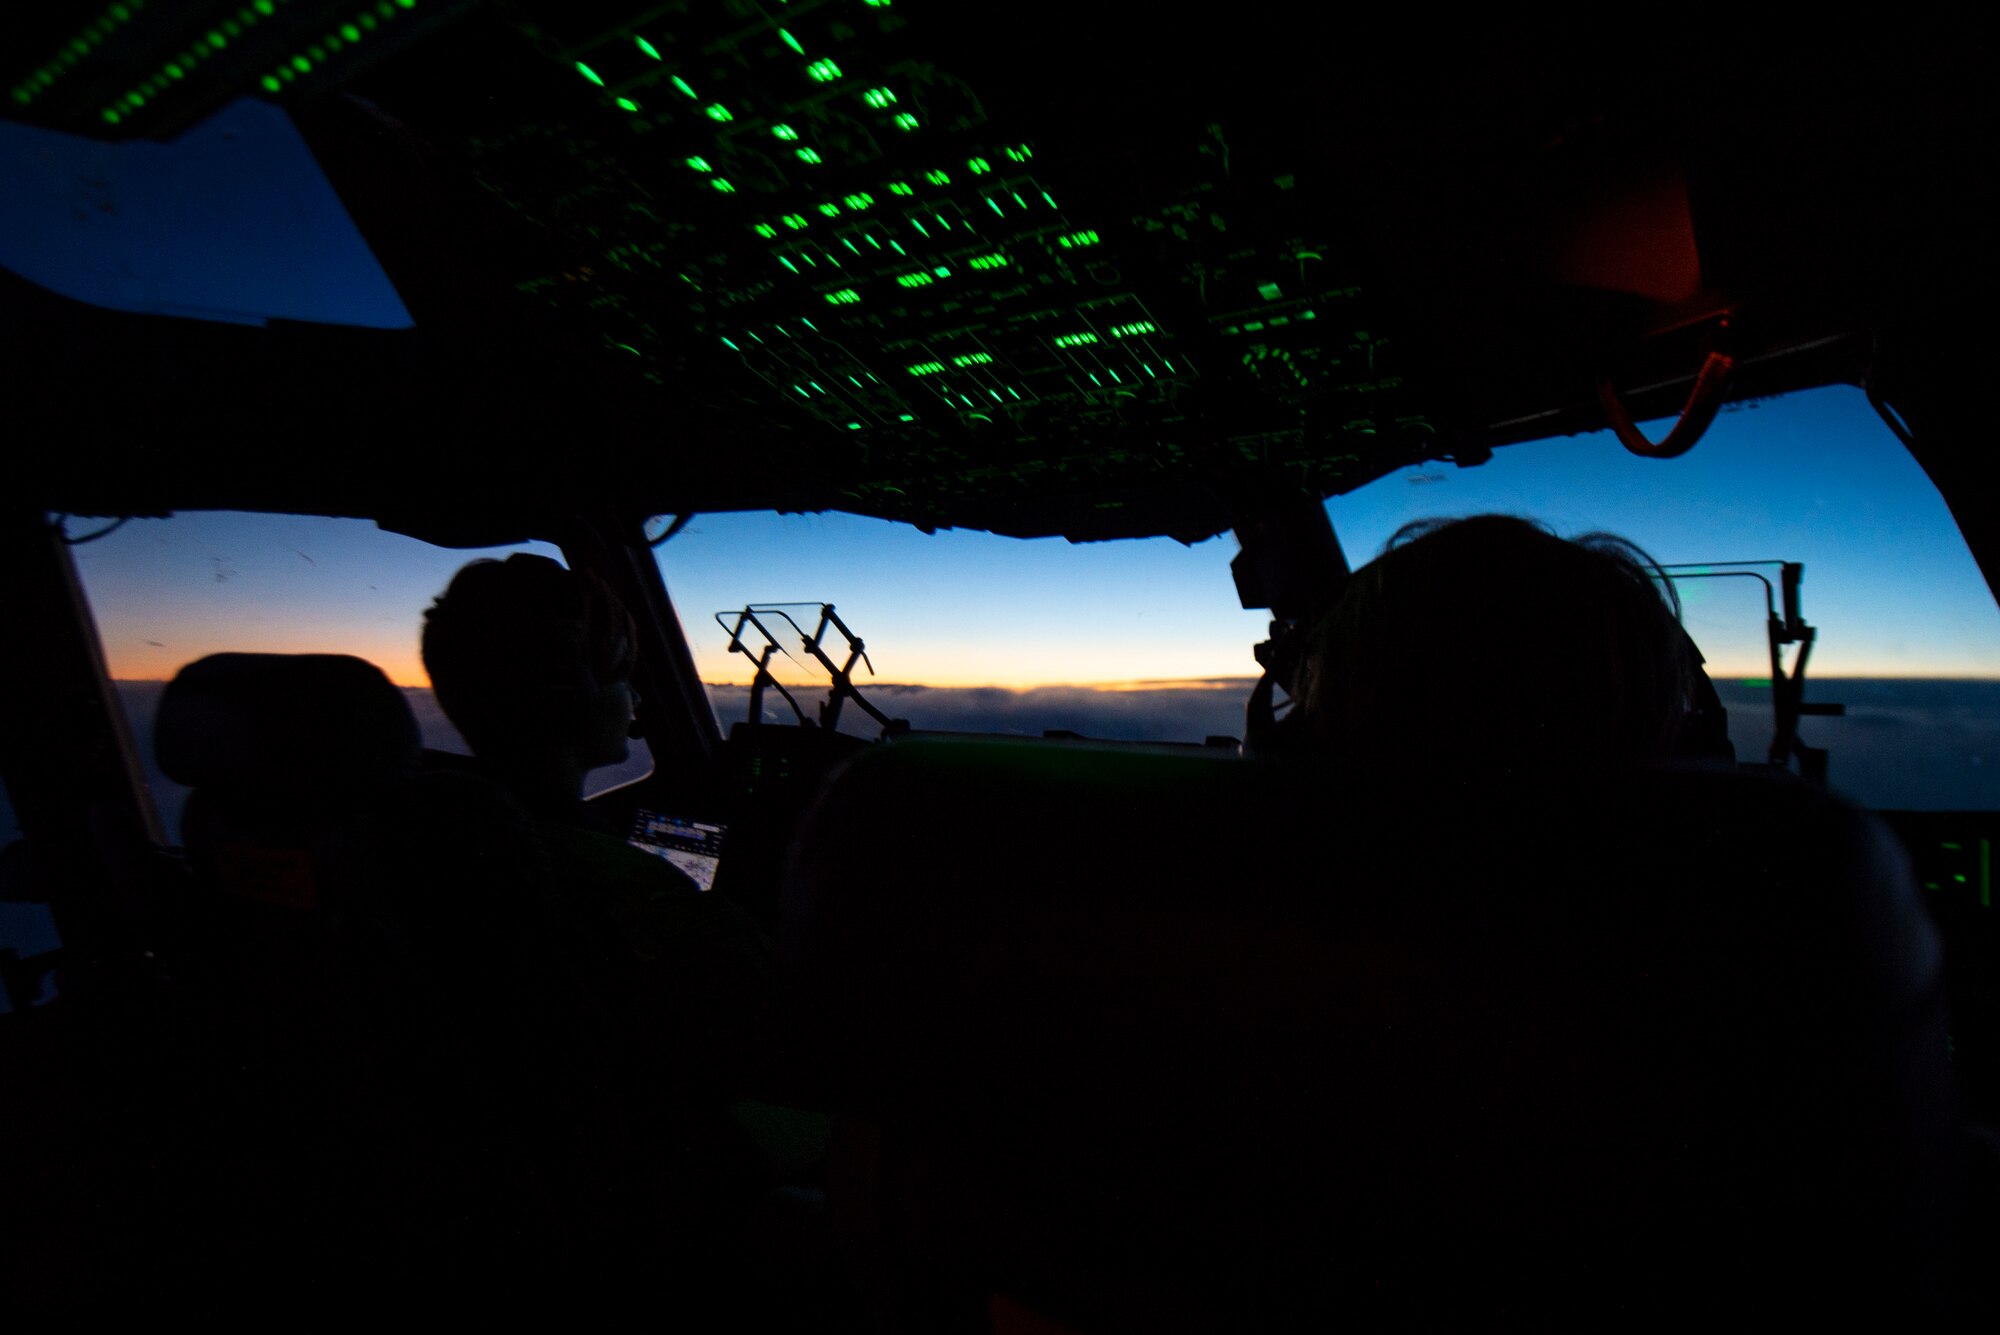 U.S. Air Force Capt. Emilia Kaiser, 8th Airlift Squadron pilot, left, flies a C-17 Globemaster III after taking off from Joint Base Lewis-McChord, Washington, during Exercise Rainier War 21B Nov. 6, 2021. The exercise is designed to demonstrate the wing’s ability to operate and survive while defeating challenges to the U.S. military advantage in all operating domains – air, land, sea and cyberspace. (U.S. Air Force photo by Staff Sgt. Tryphena Mayhugh)